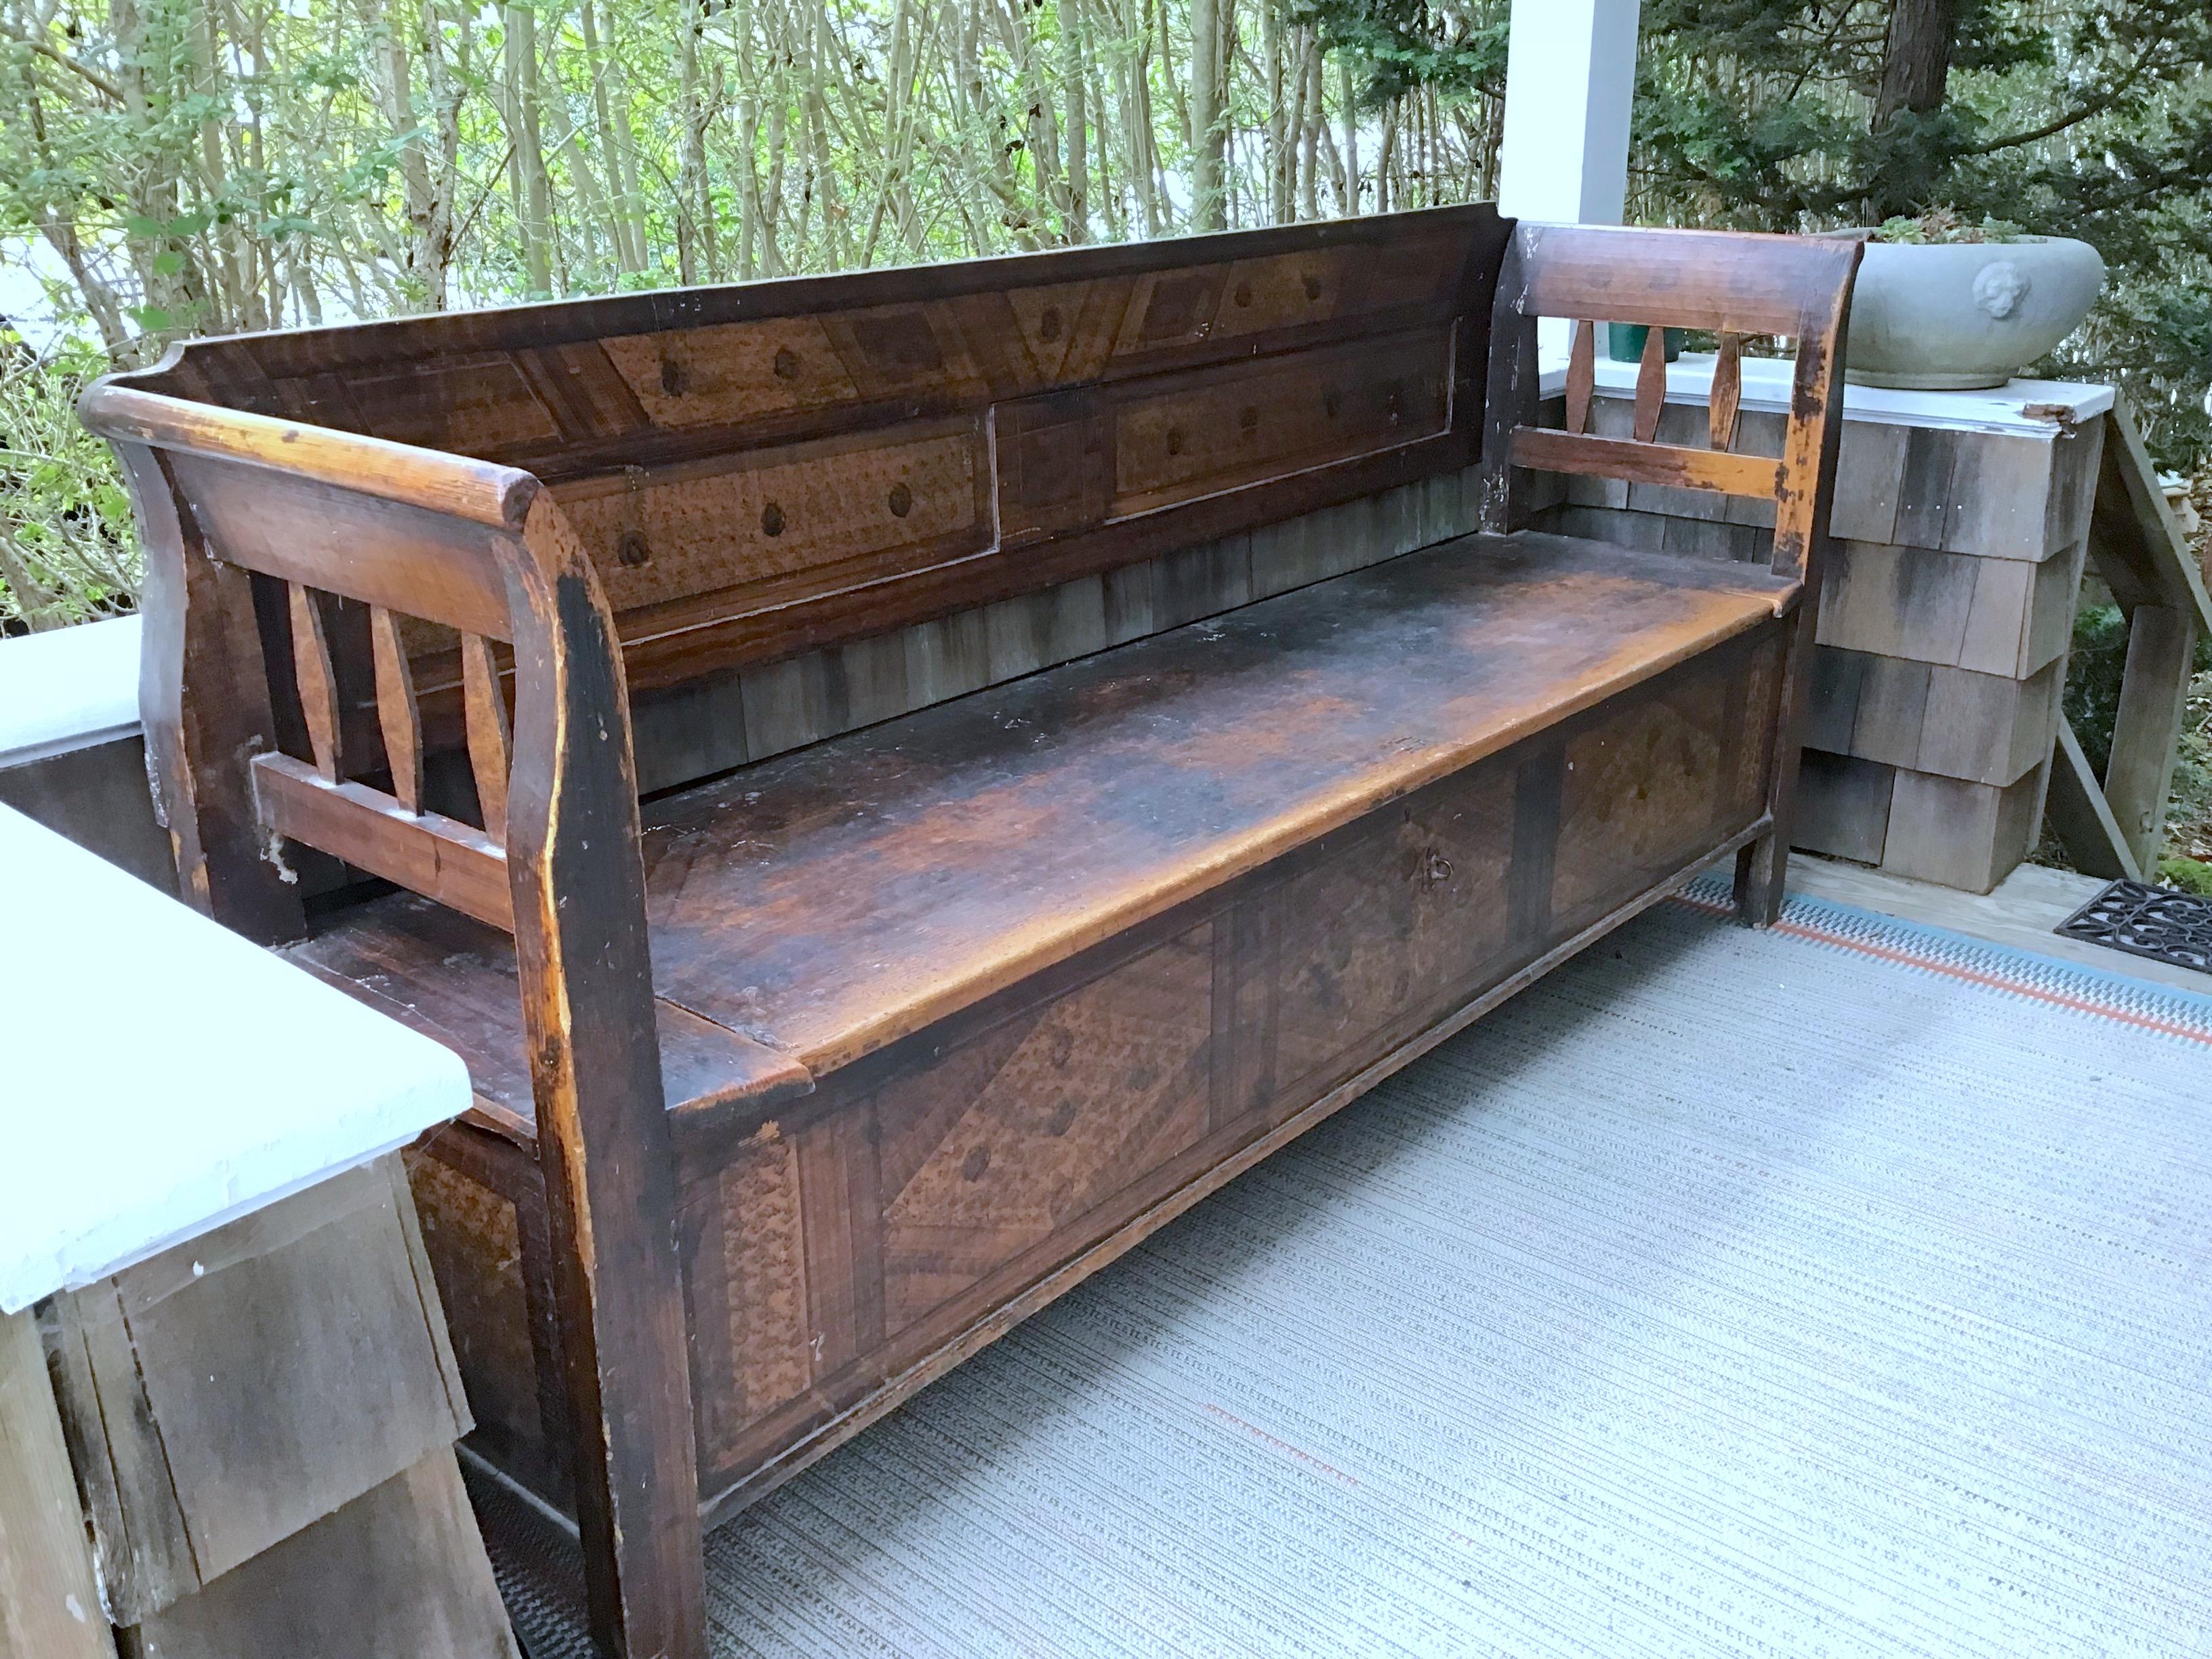 A primitive bench from the Netherlands, a faux Painted storage bench from the 19th Century, but possibly even older. Exquisite faux grain work runs along the back and front and sides. The hall bench opens for storage underneath the seat.

